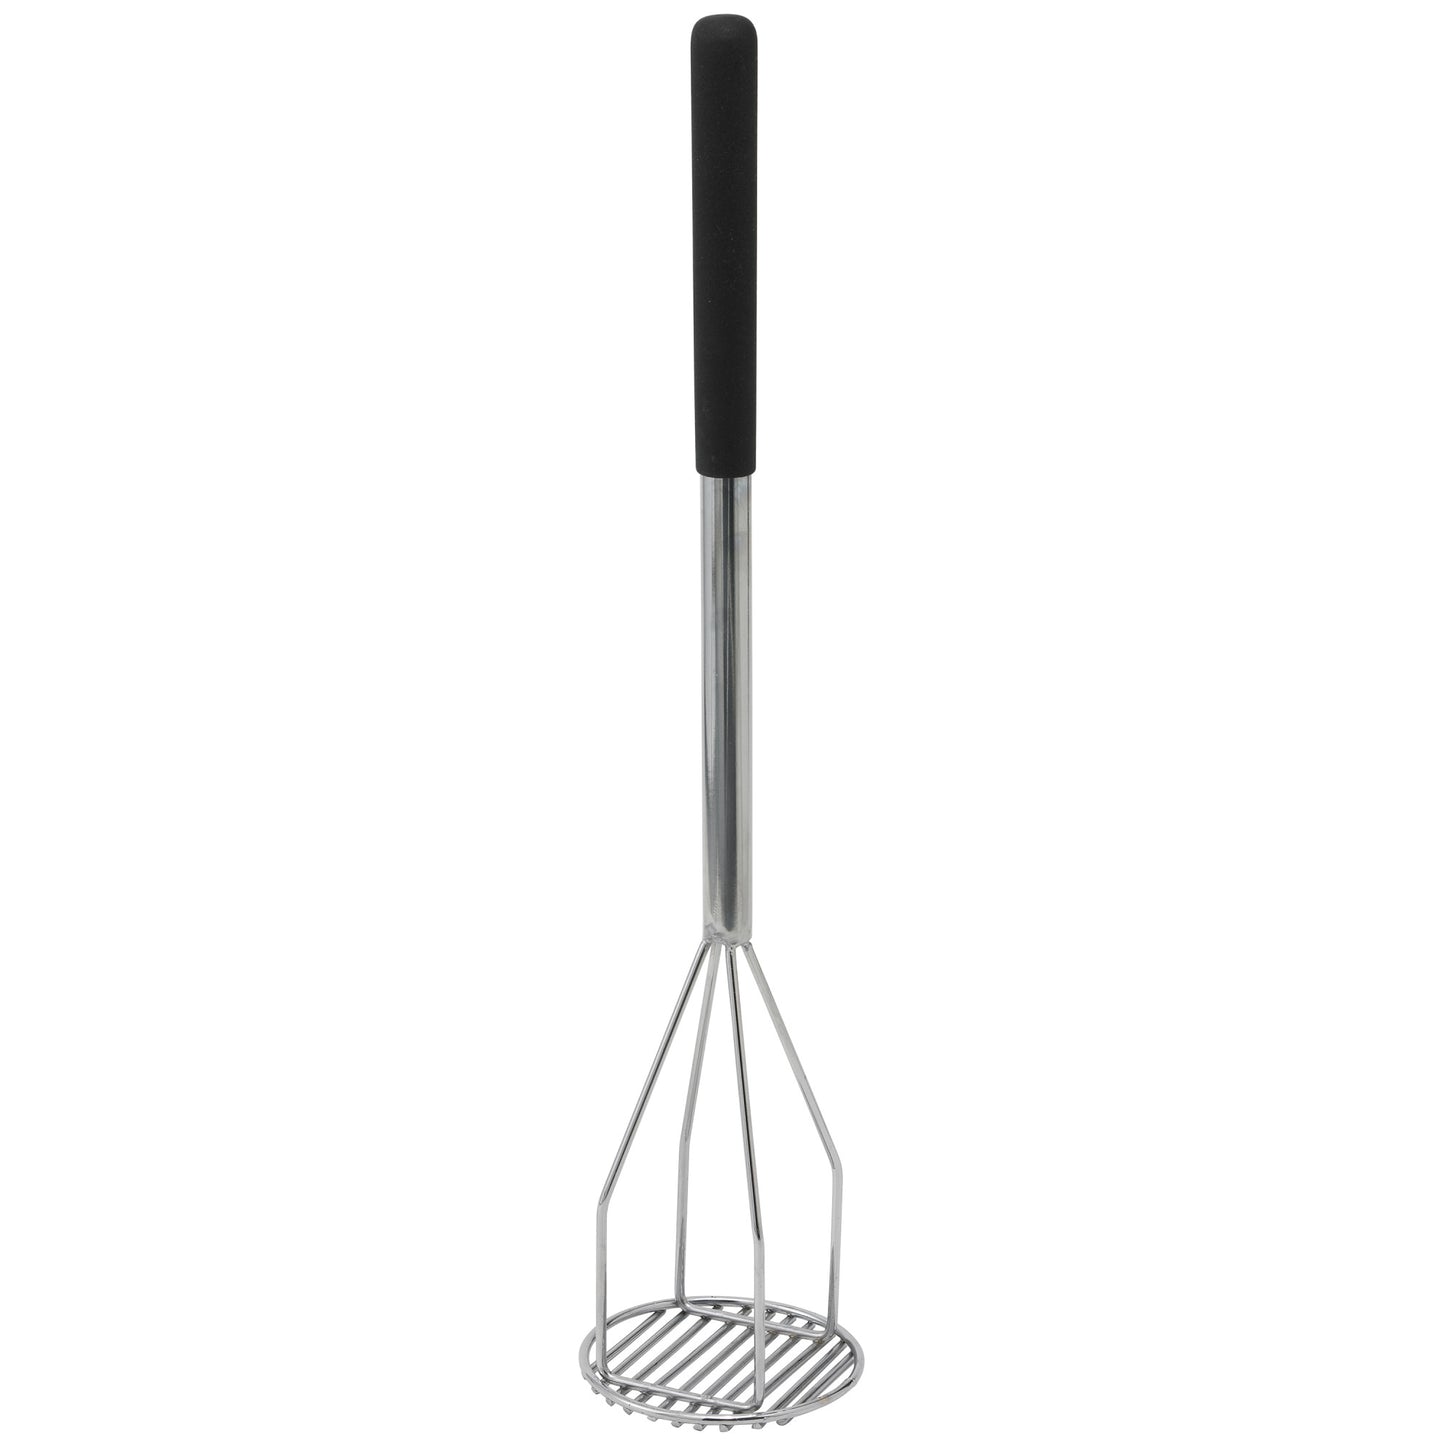 PTMP-24R - Potato Masher with Plastic Handle - 5" Round